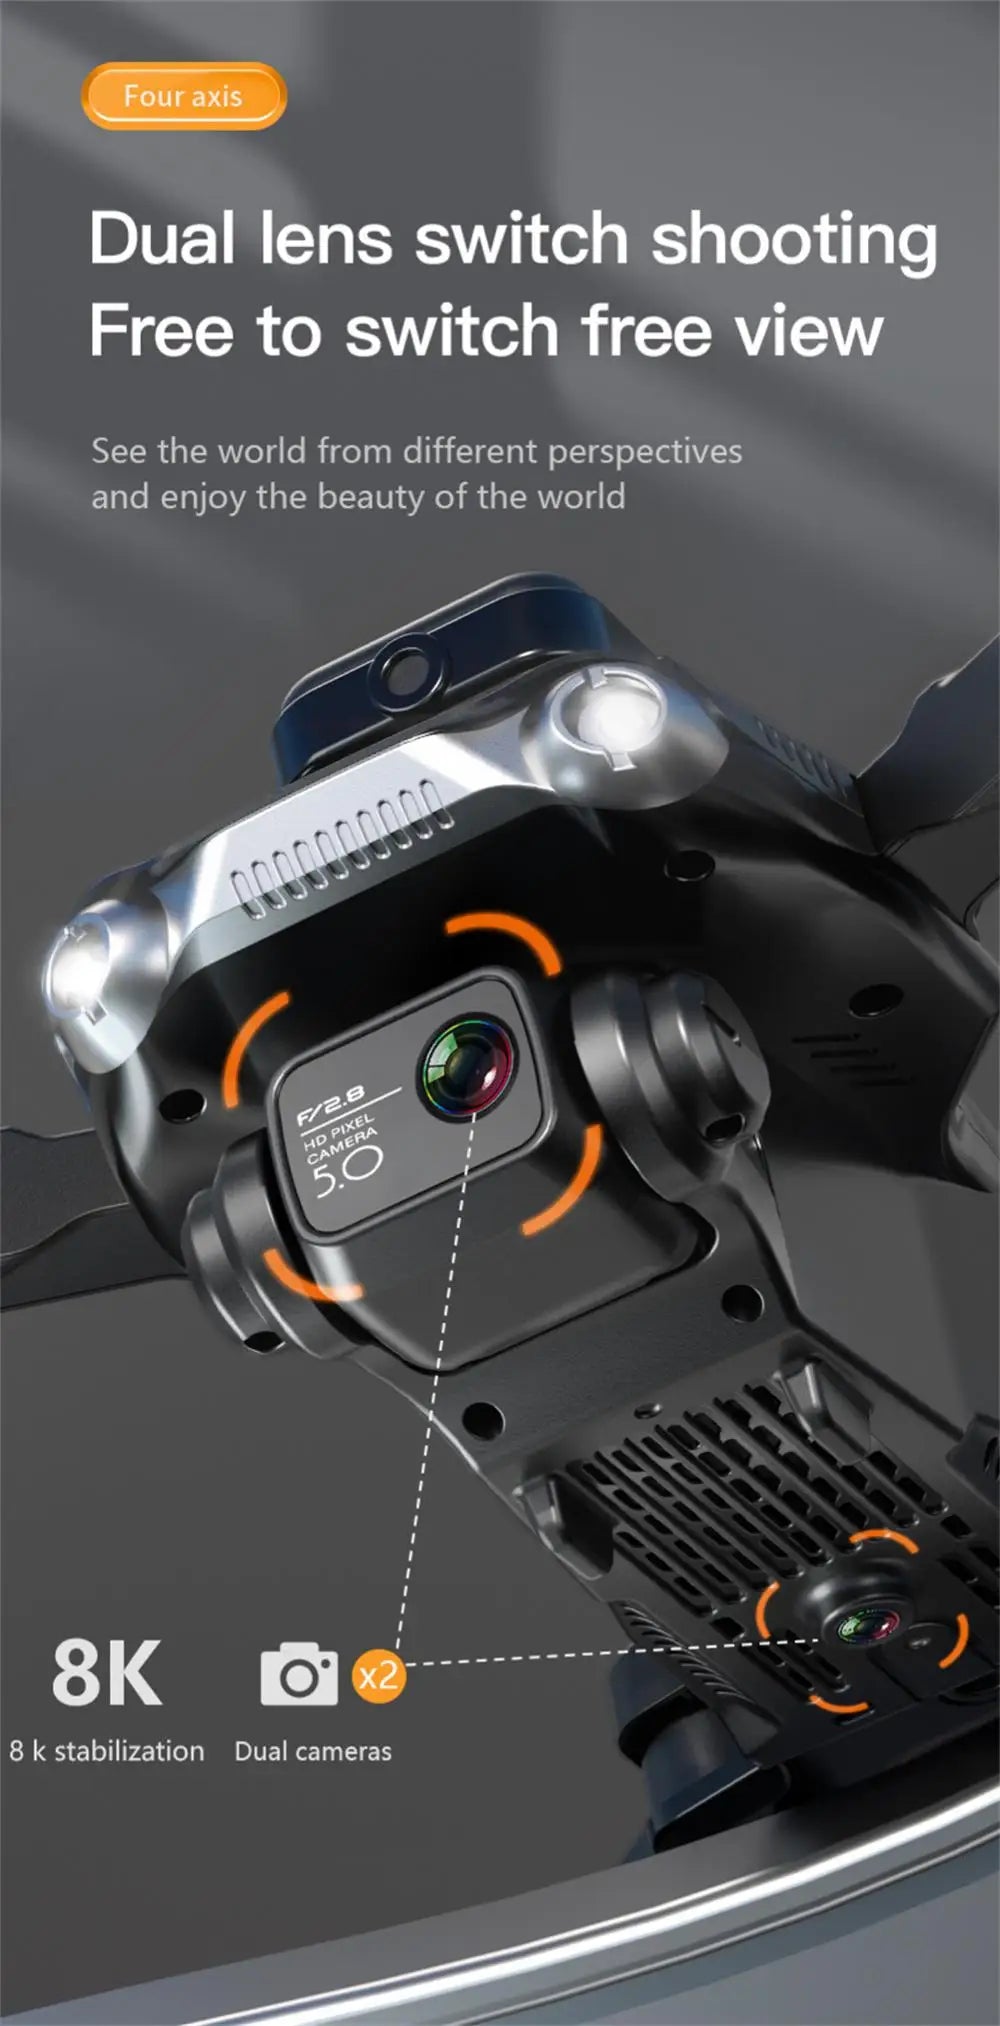 V28 Drone, four axis dual lens switch shooting free to switch free view see